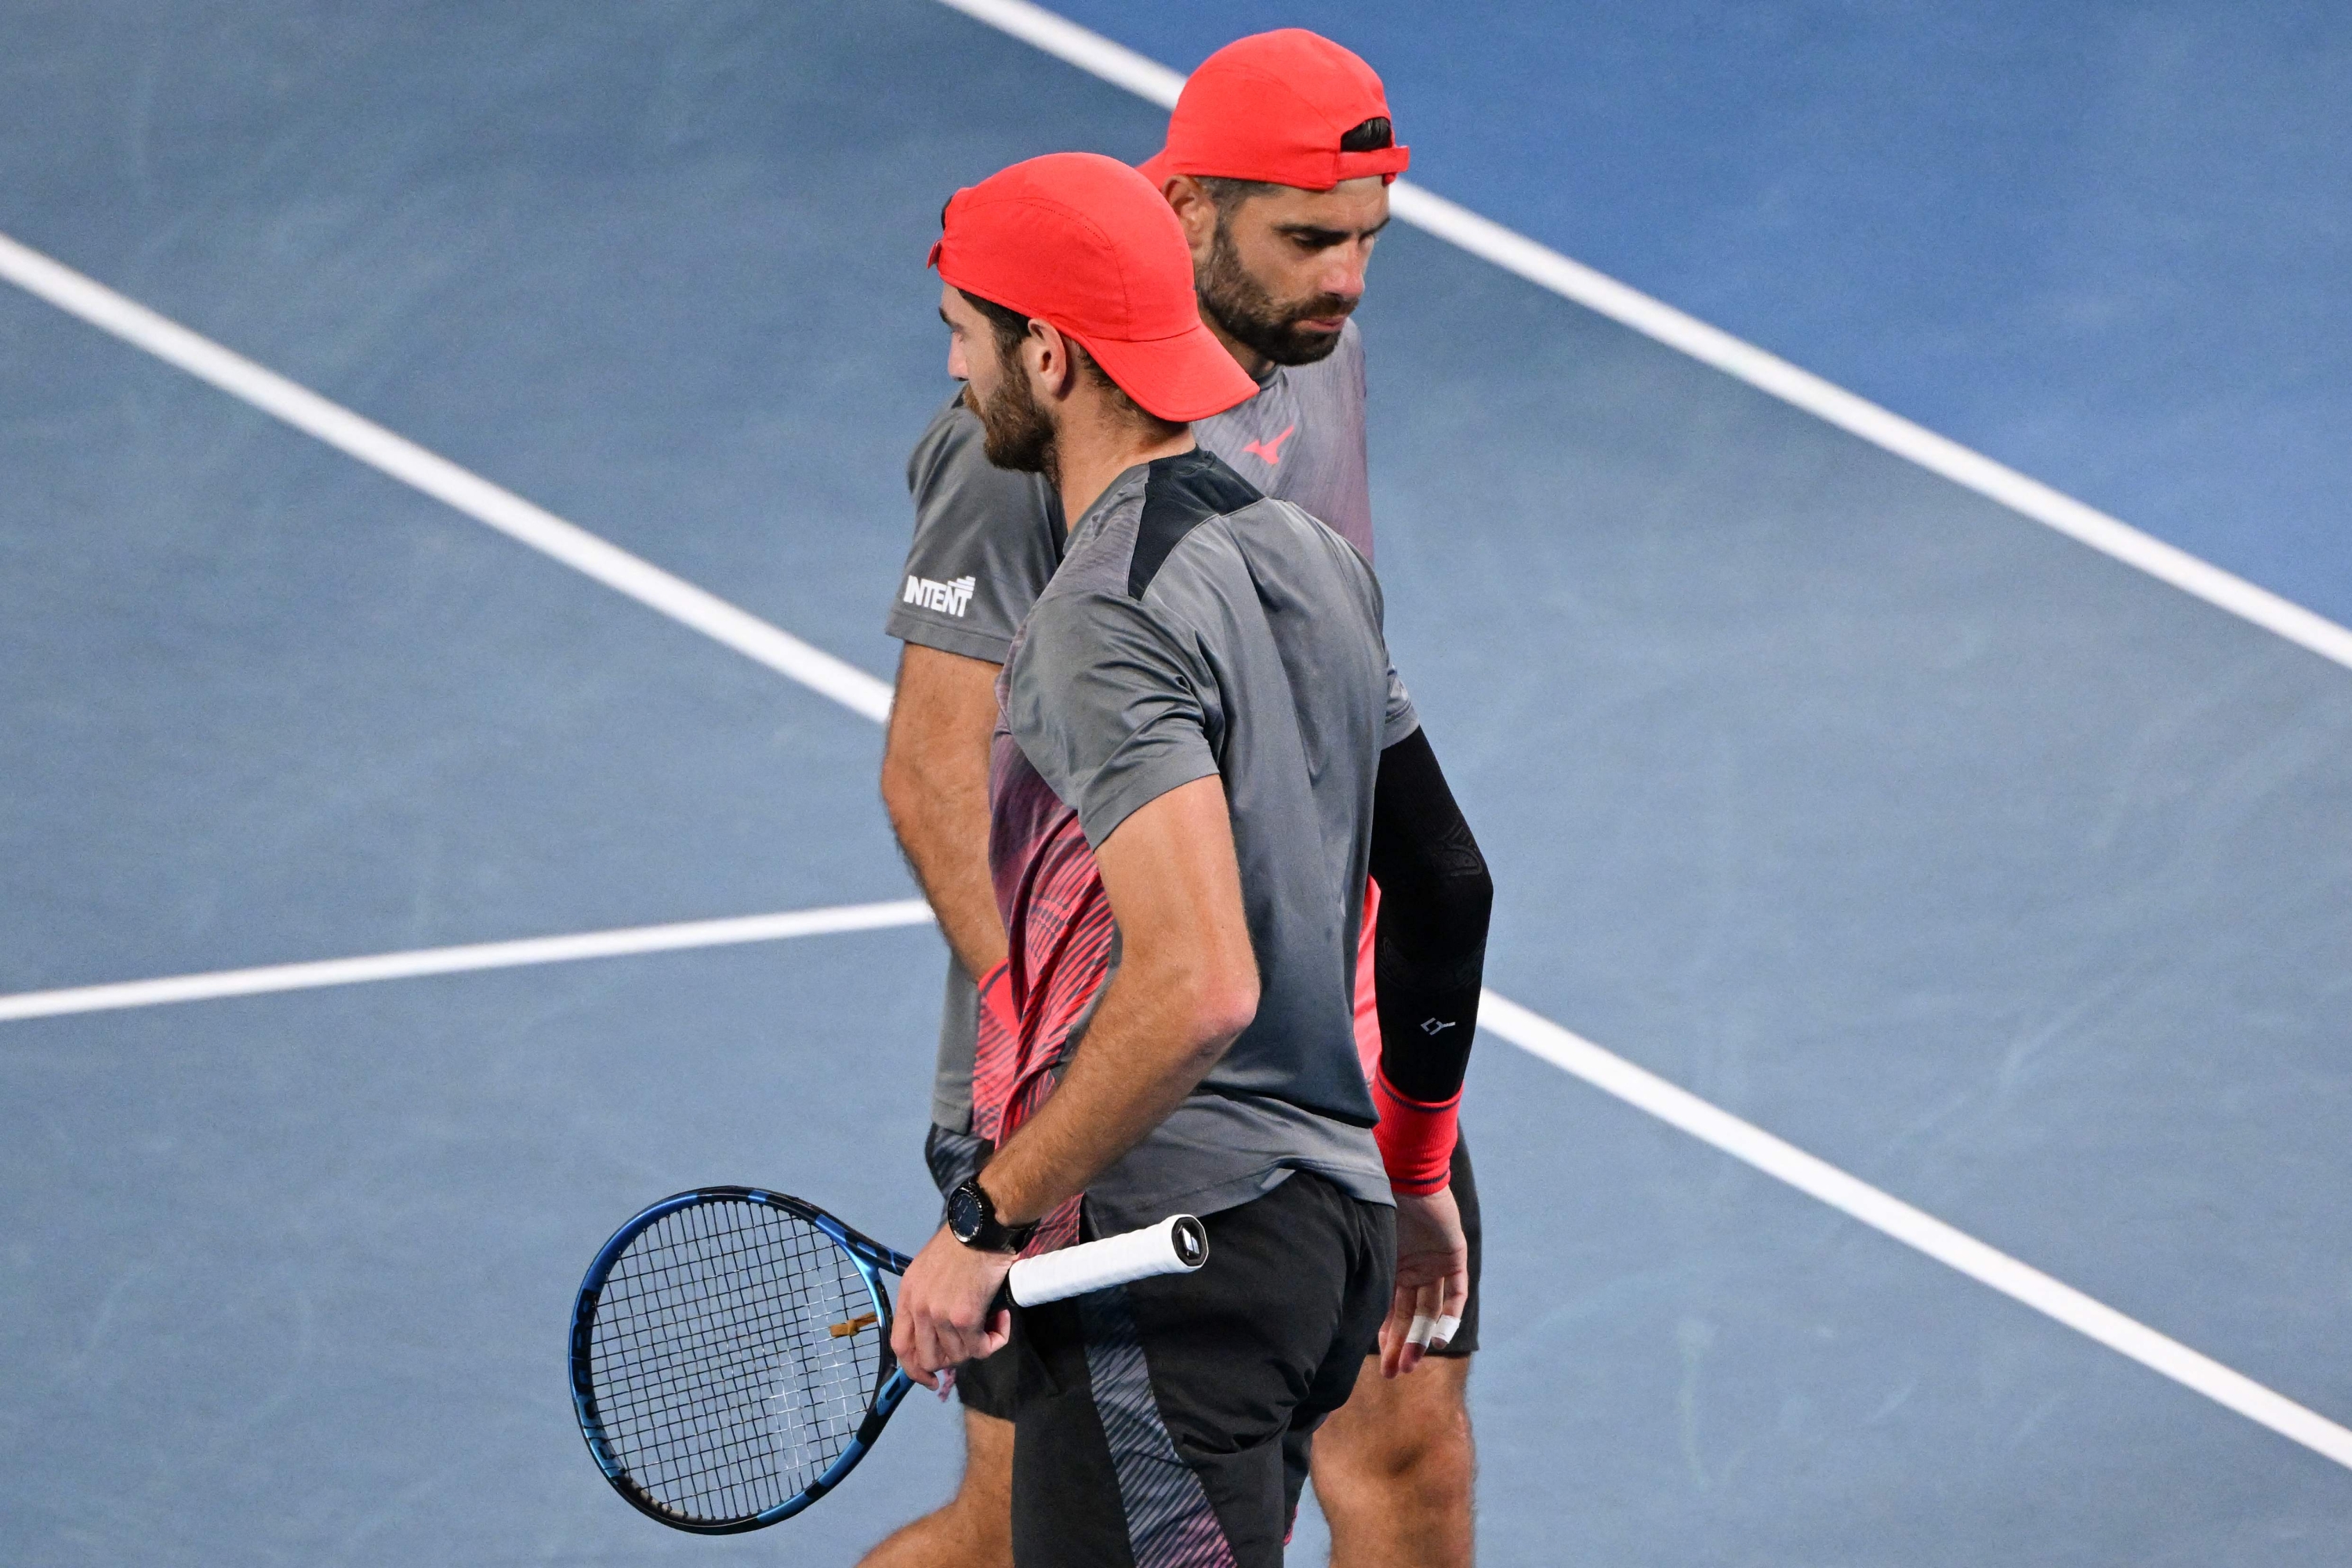 Italy's Simone Bolelli (R) and Andrea Vavassori prepare to play a point against India's Rohan Bopanna and Australia's Matthew Ebden during their men's doubles final match on day 14 of the Australian Open tennis tournament in Melbourne on January 27, 2024. (Photo by WILLIAM WEST / AFP) / -- IMAGE RESTRICTED TO EDITORIAL USE - STRICTLY NO COMMERCIAL USE --